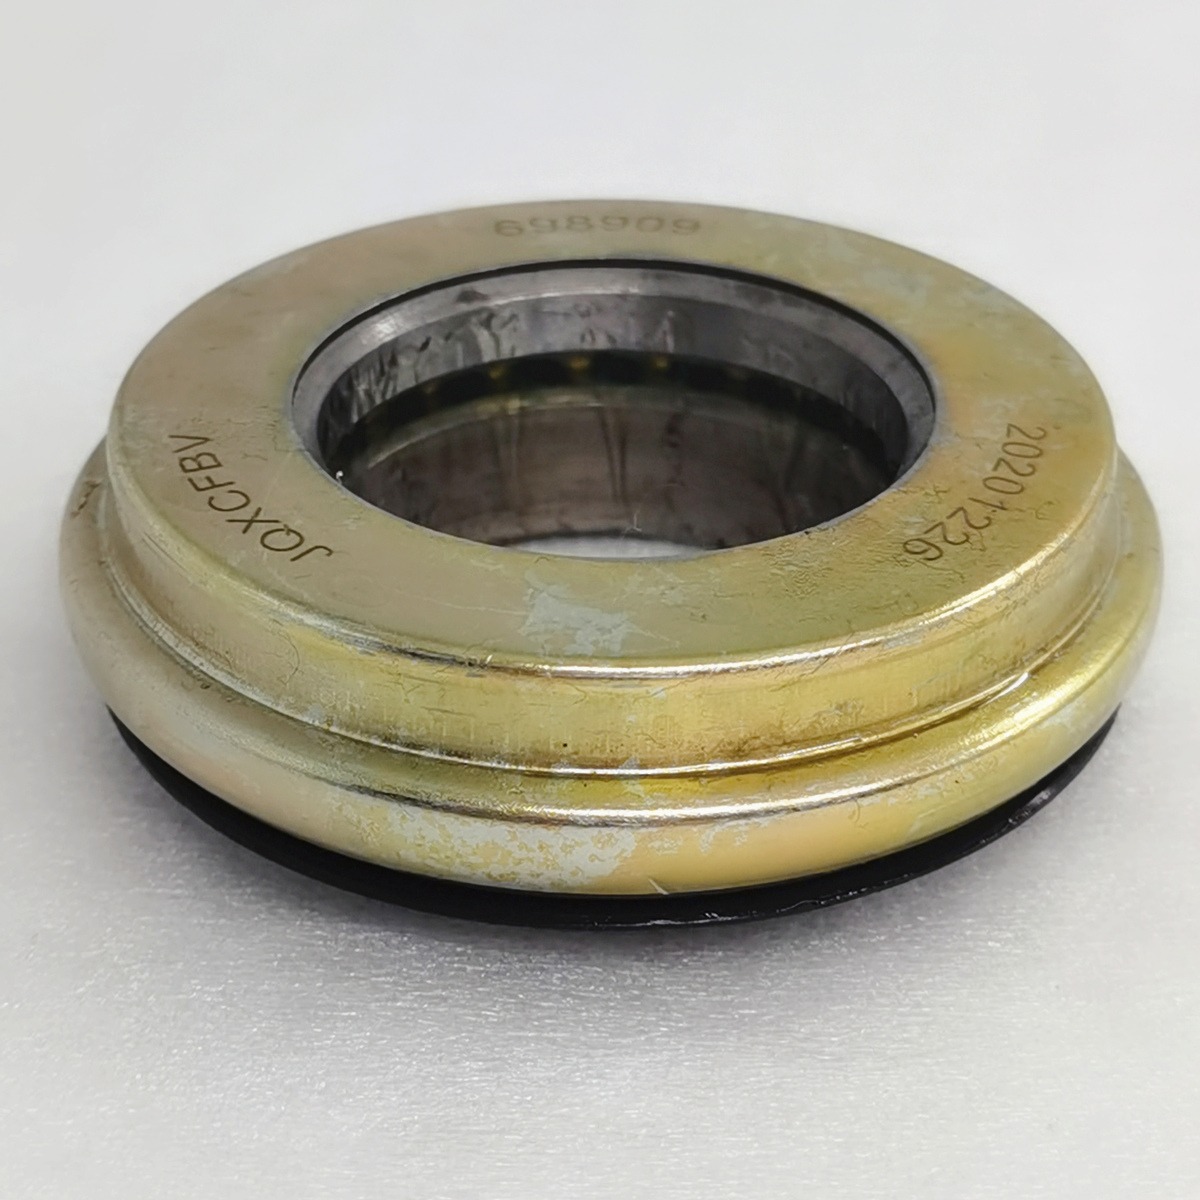 DAYANG Spare Parts Custom Production Tricycle 3 Wheel Motorcycle 698909 Bearing for Sale China Top Quality High-quality CN;CHO